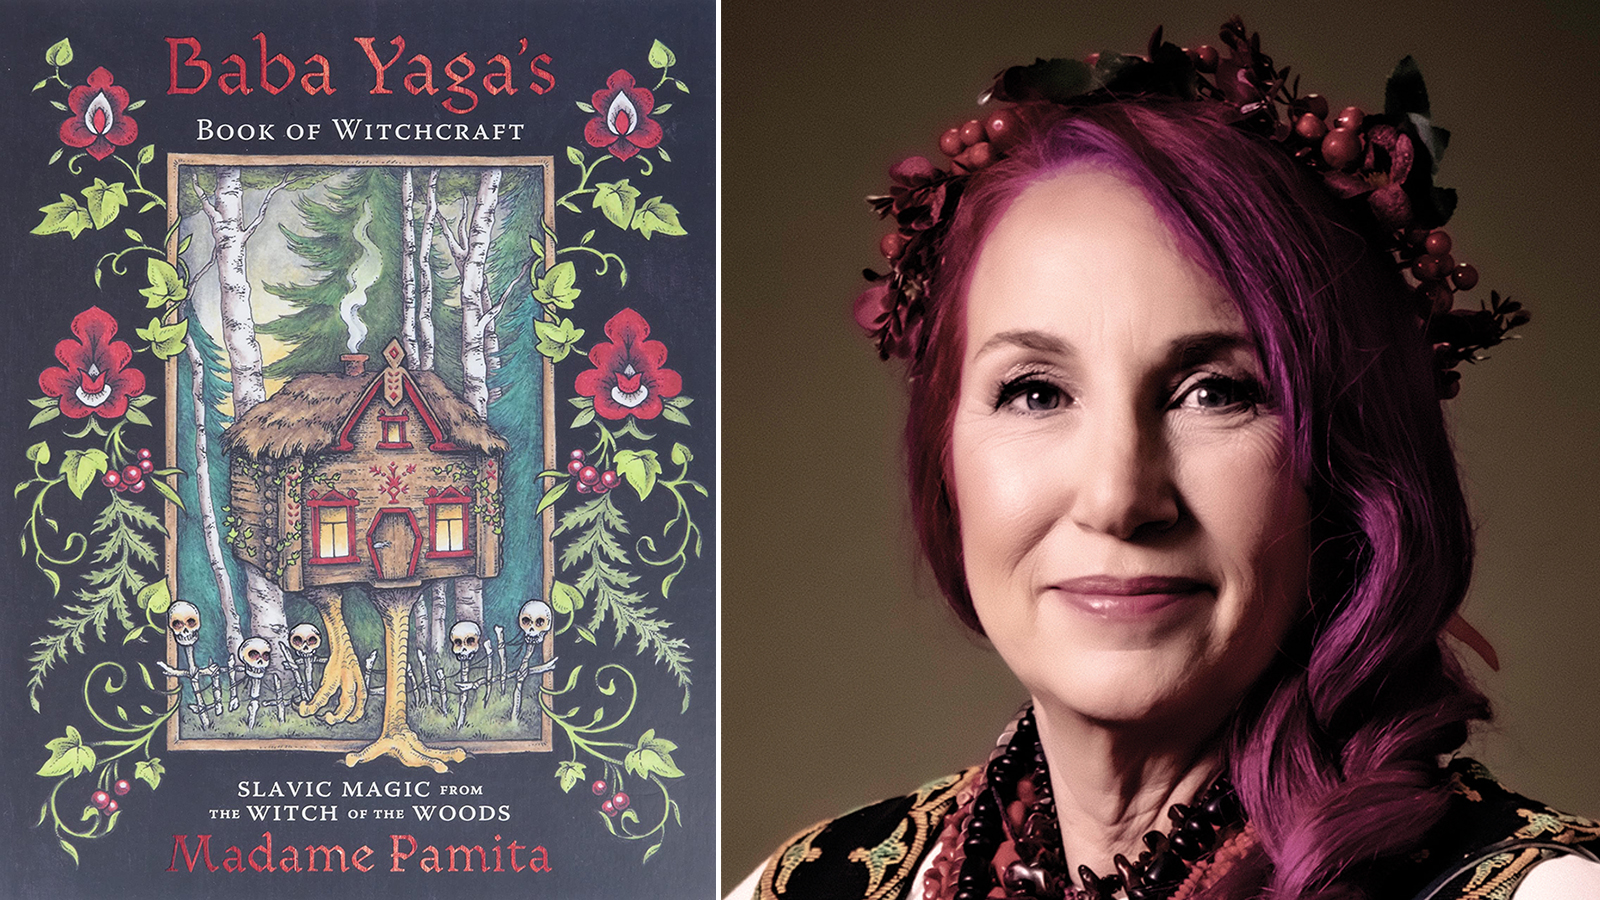 "Baba Yaga's Book of Witchcraft: Slavic Magic from the Witch of the Woods" and author Madame Pamita. Photo by Chris Strother